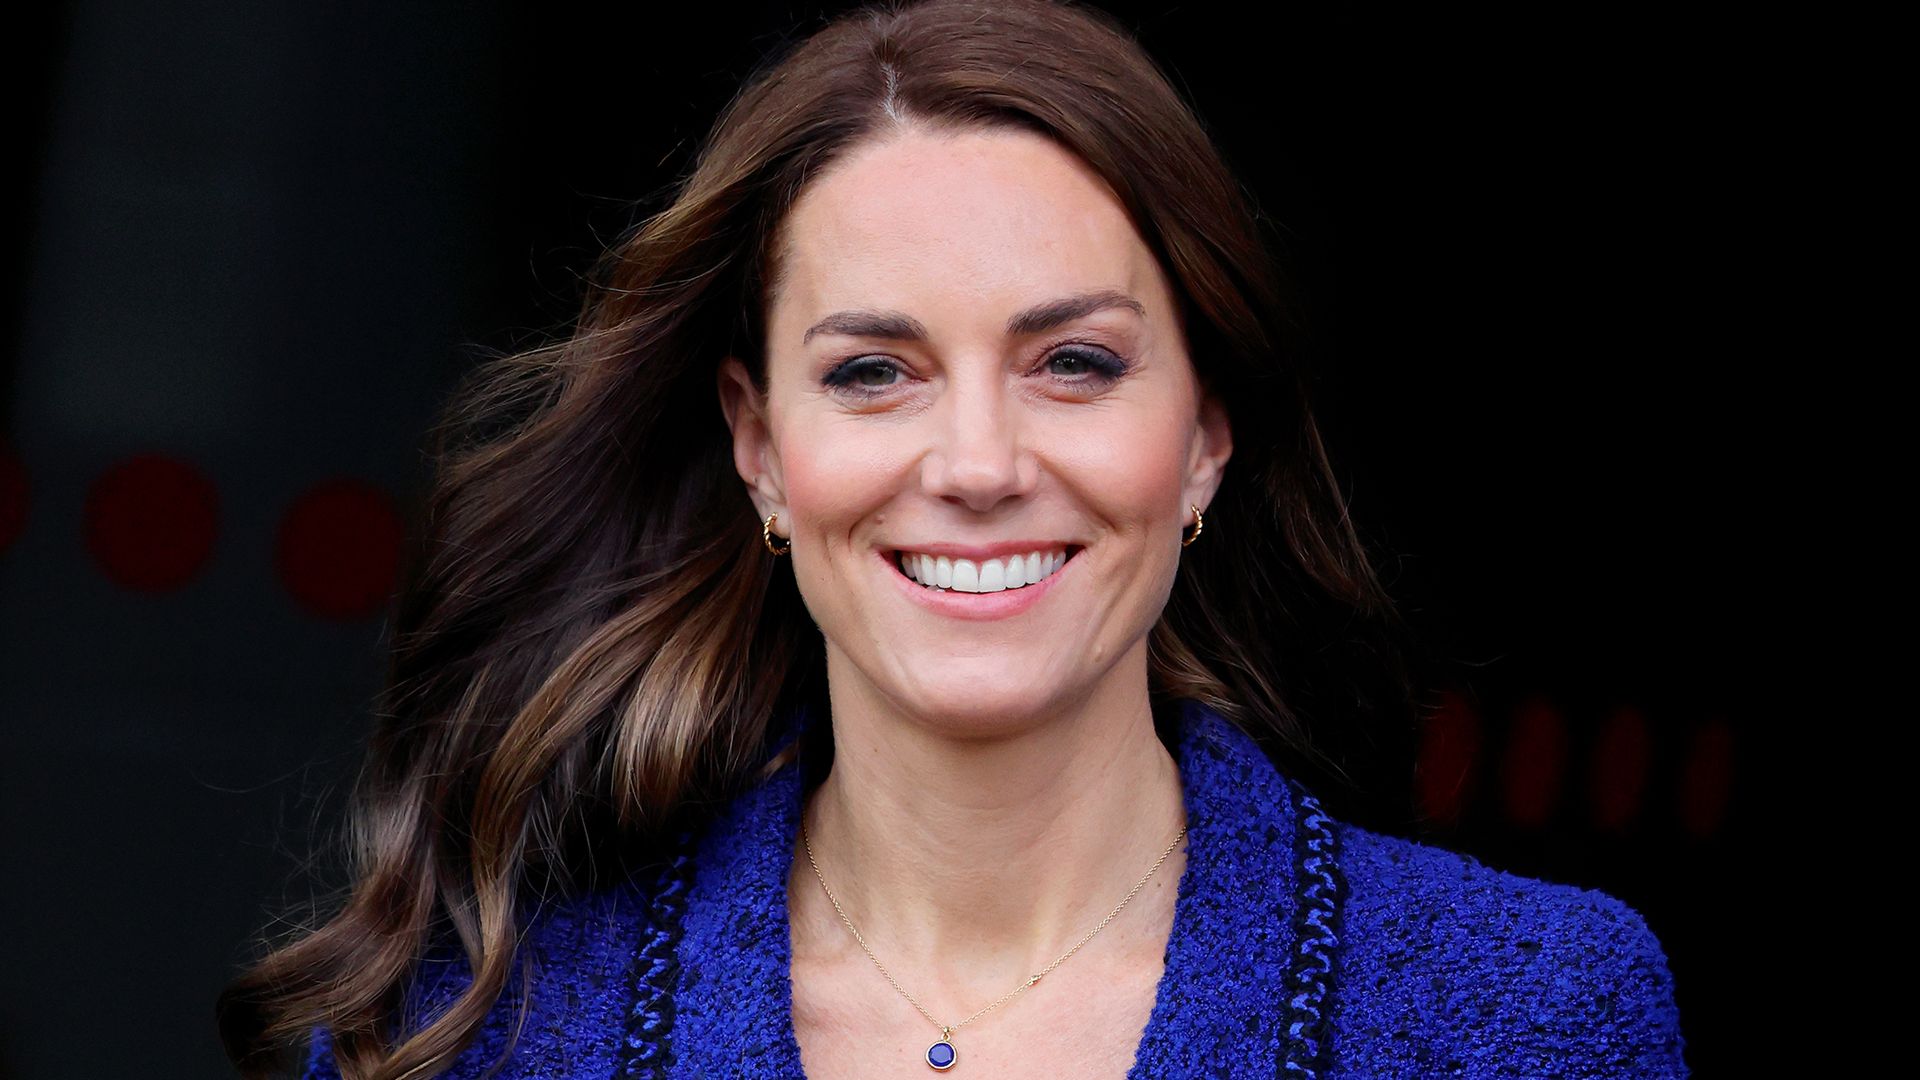 Kate Middleton cheers on Prince William in beautiful boho dress | HELLO!